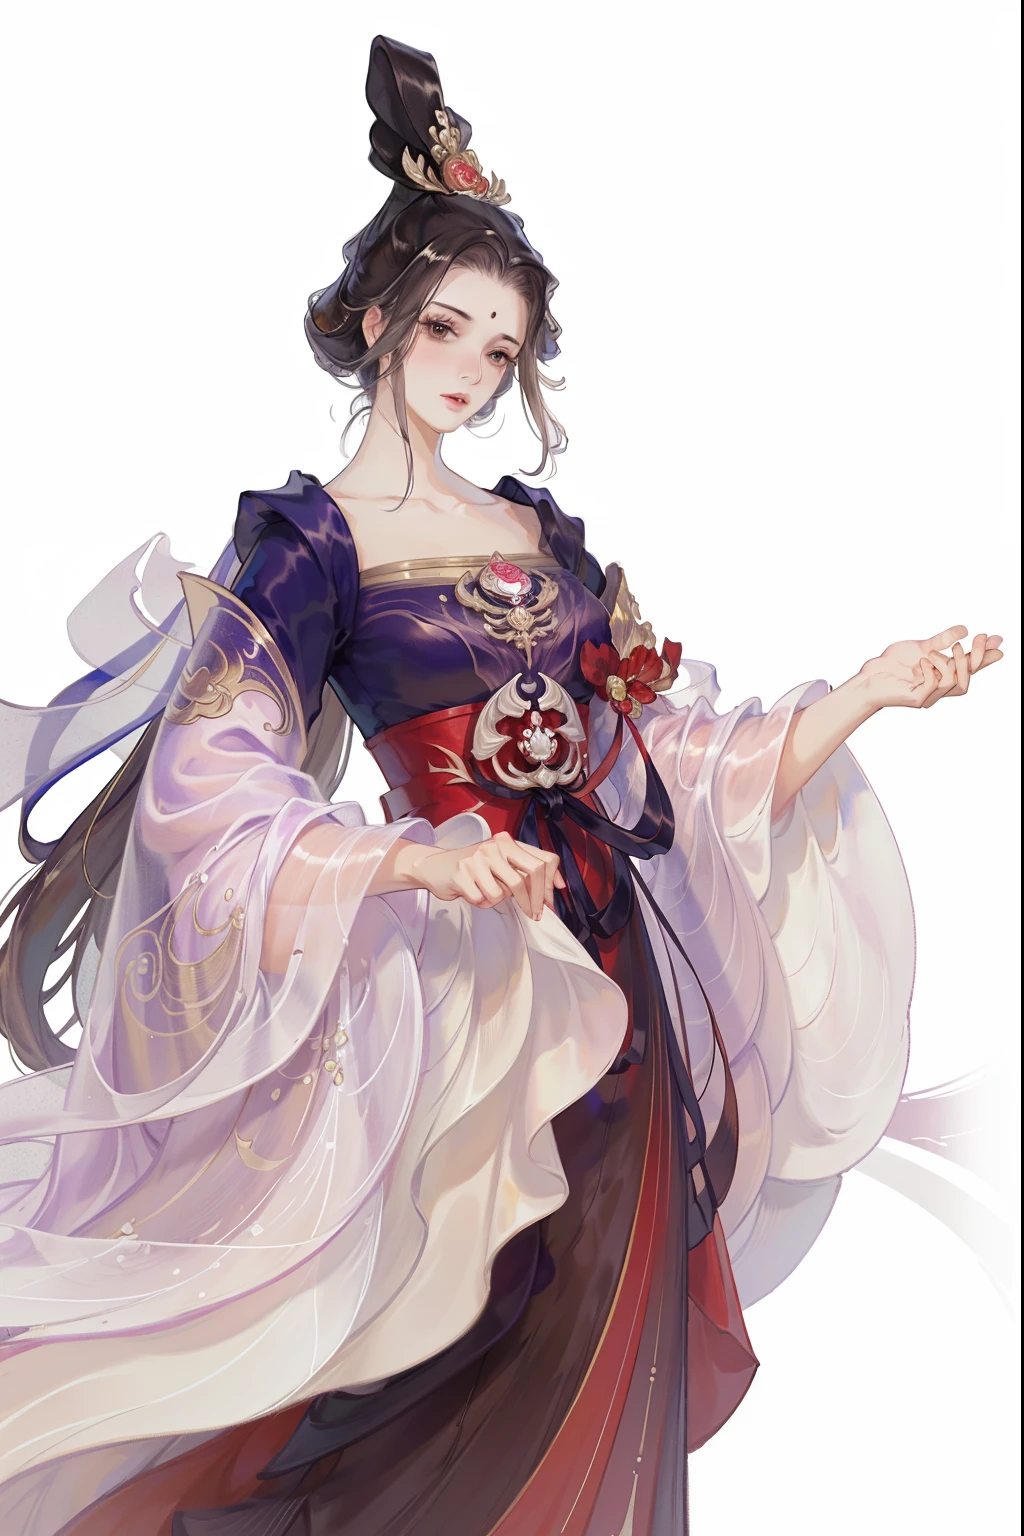 (((tmasterpiece, Best quality at best, Ultra-high resolution, CG unified 8K wallpaper, Best quality, ultra - detailed, ultra HD picture quality))), 1 girl, cabelos preto e longos, game fairy, Red and black clothes, Hanfu, yarn, flowing gauze, jewely, ((Colorful)), Nice face, beautidful eyes, Beautiful hairstyle, Beautiful costumes, Structurally sound